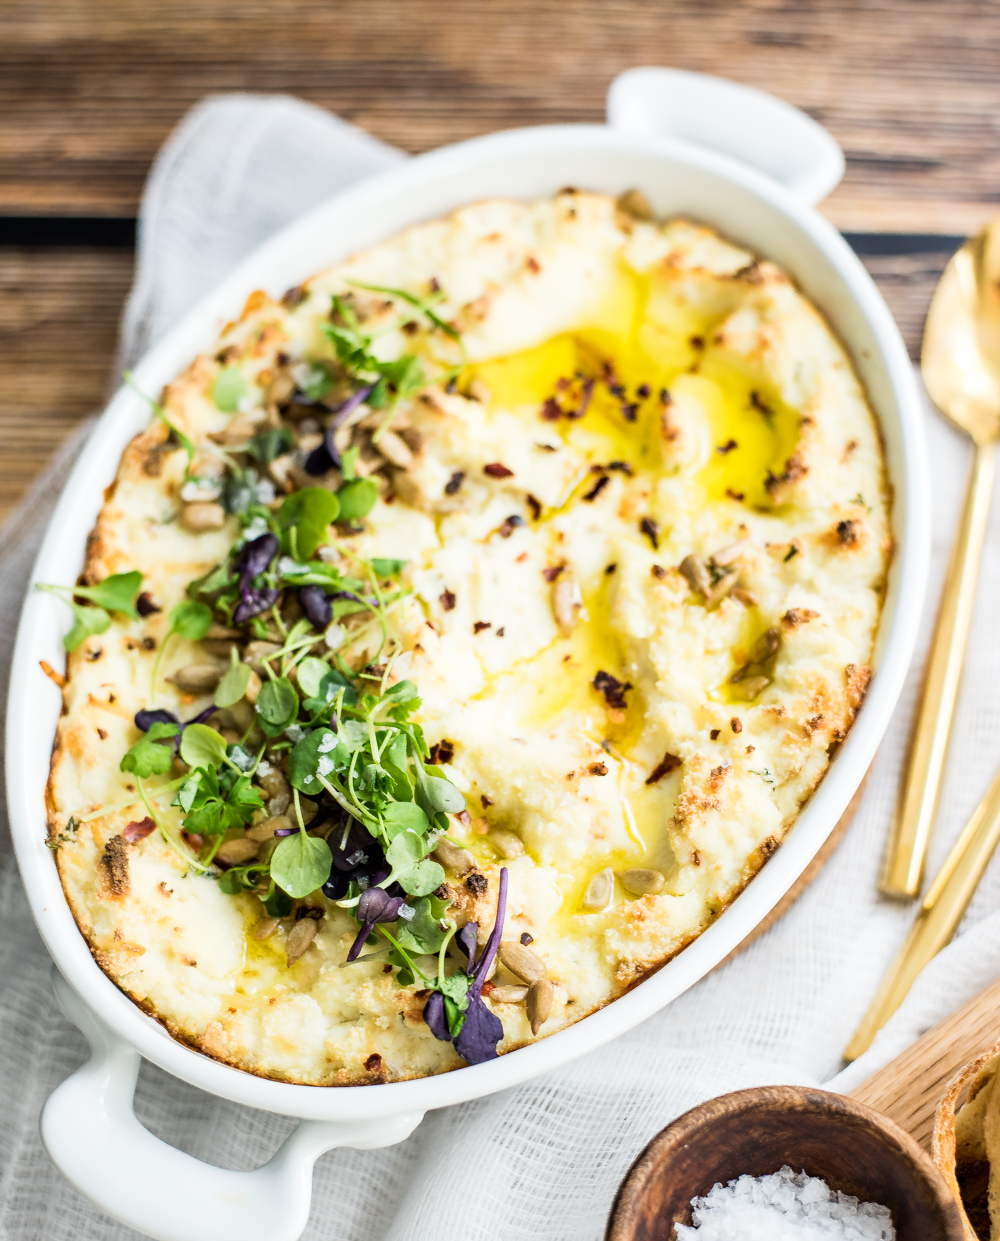 Baked ricotta cheese dip with garlic and thyme is the perfect simple and quick appetizer recipe. It's great served at a dinner party or a game day shindig!